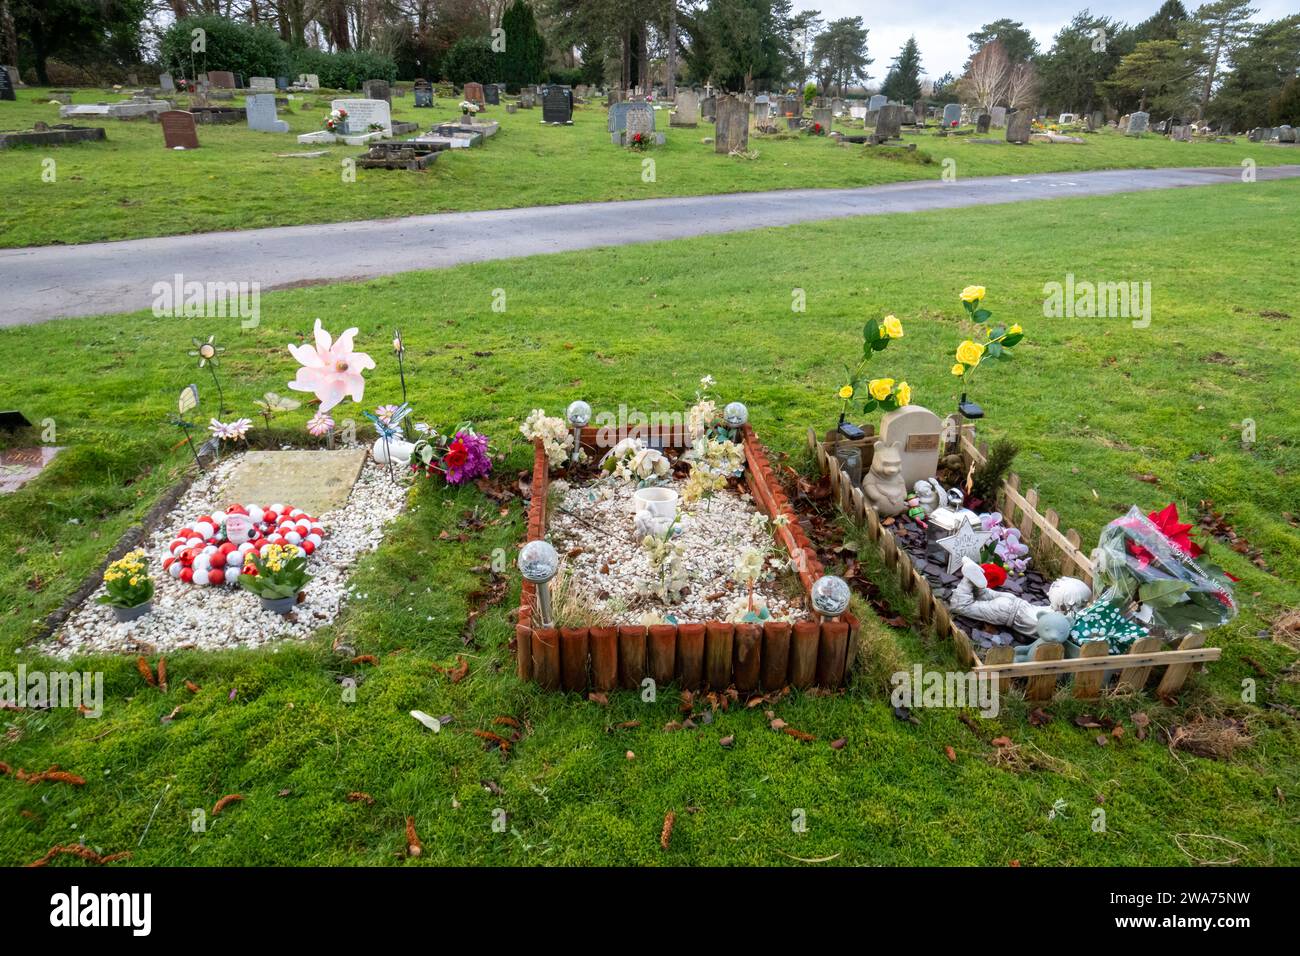 Infant graves at Magdalen Hill Cemetery, Winchester, England, UK. Graves of babies baby infant infants young children with toys and decorations. Stock Photo